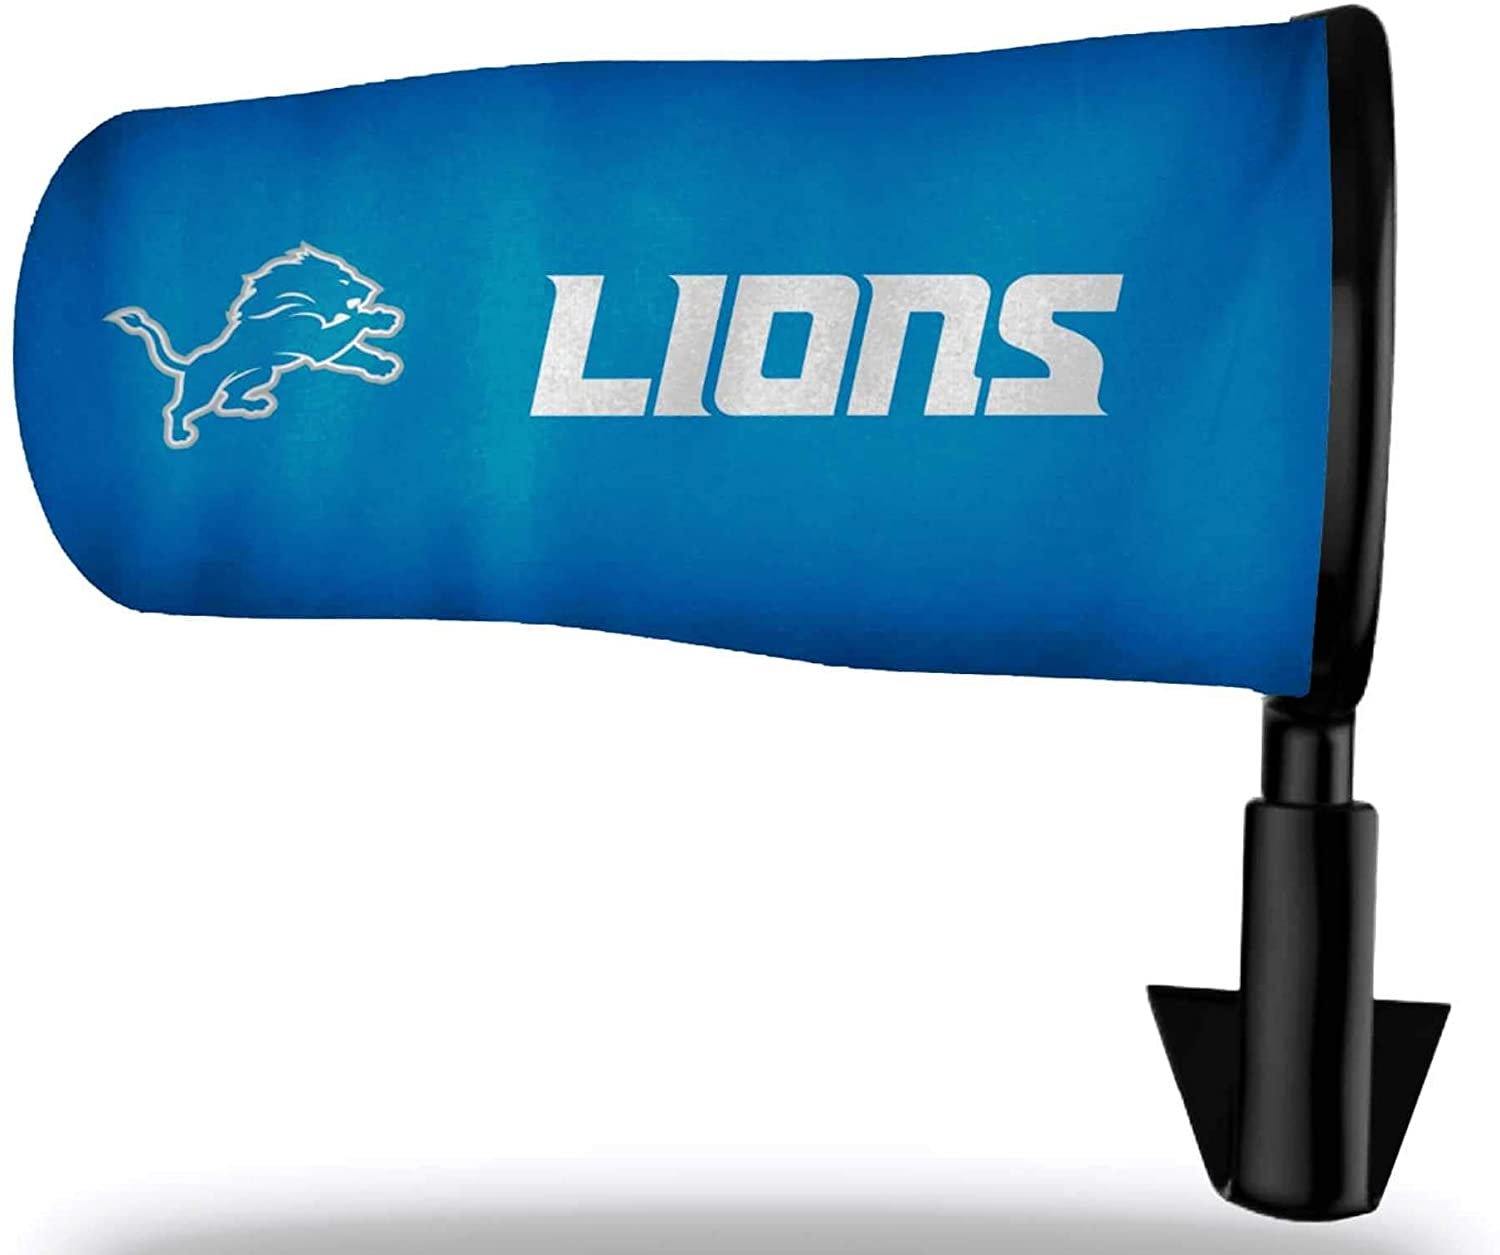 Detroit Lions Premium Auto Windsock Car Flag Banner with Pole Included, Wind Sock Football